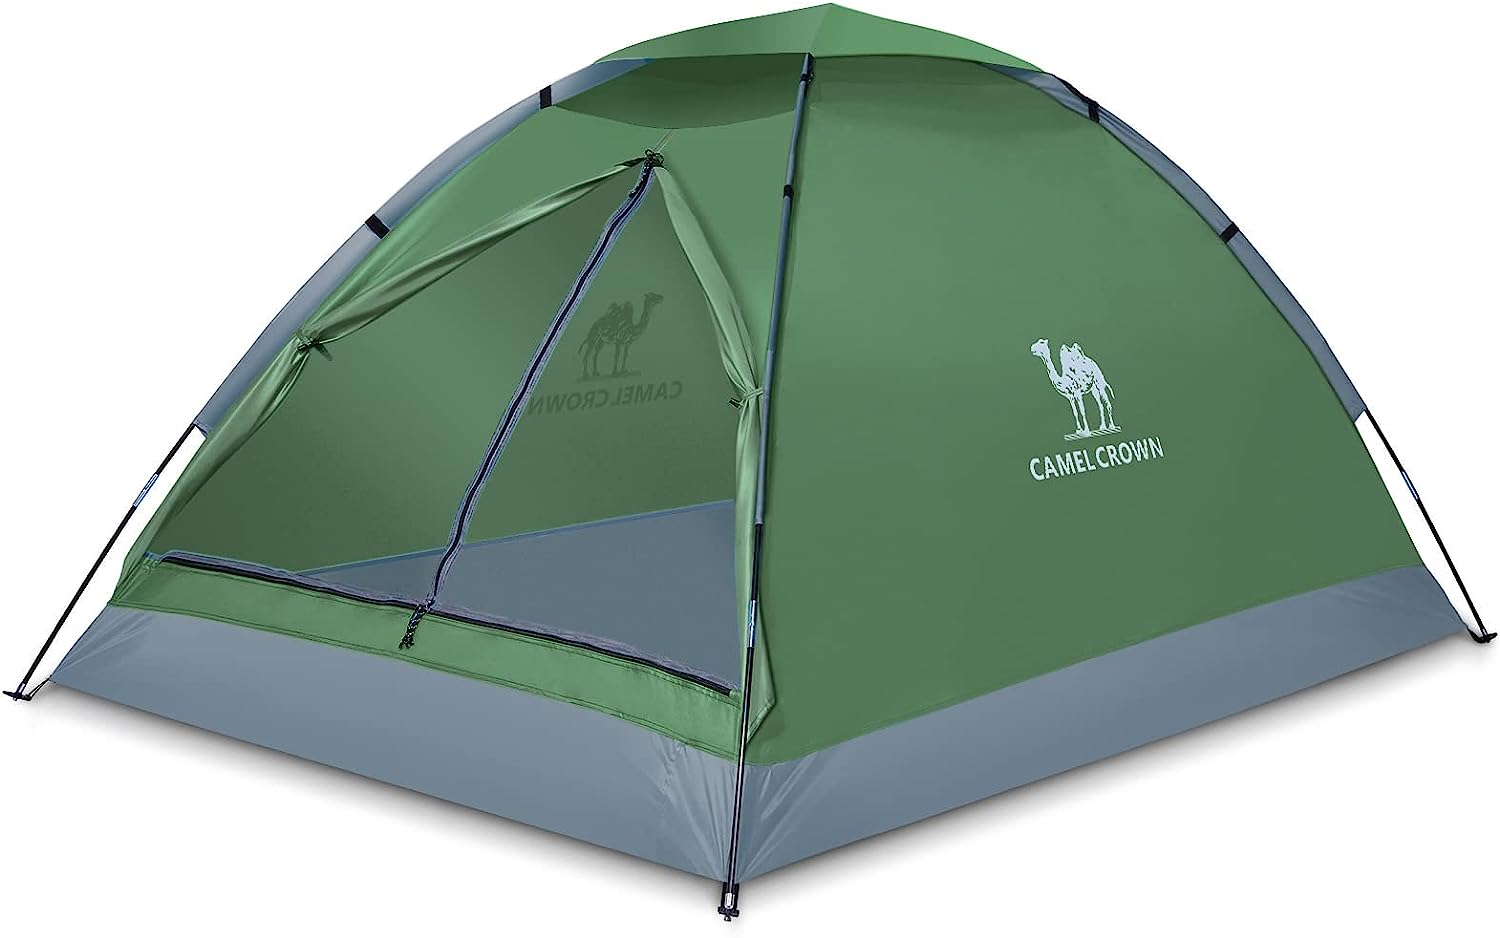 camel crown dome tent